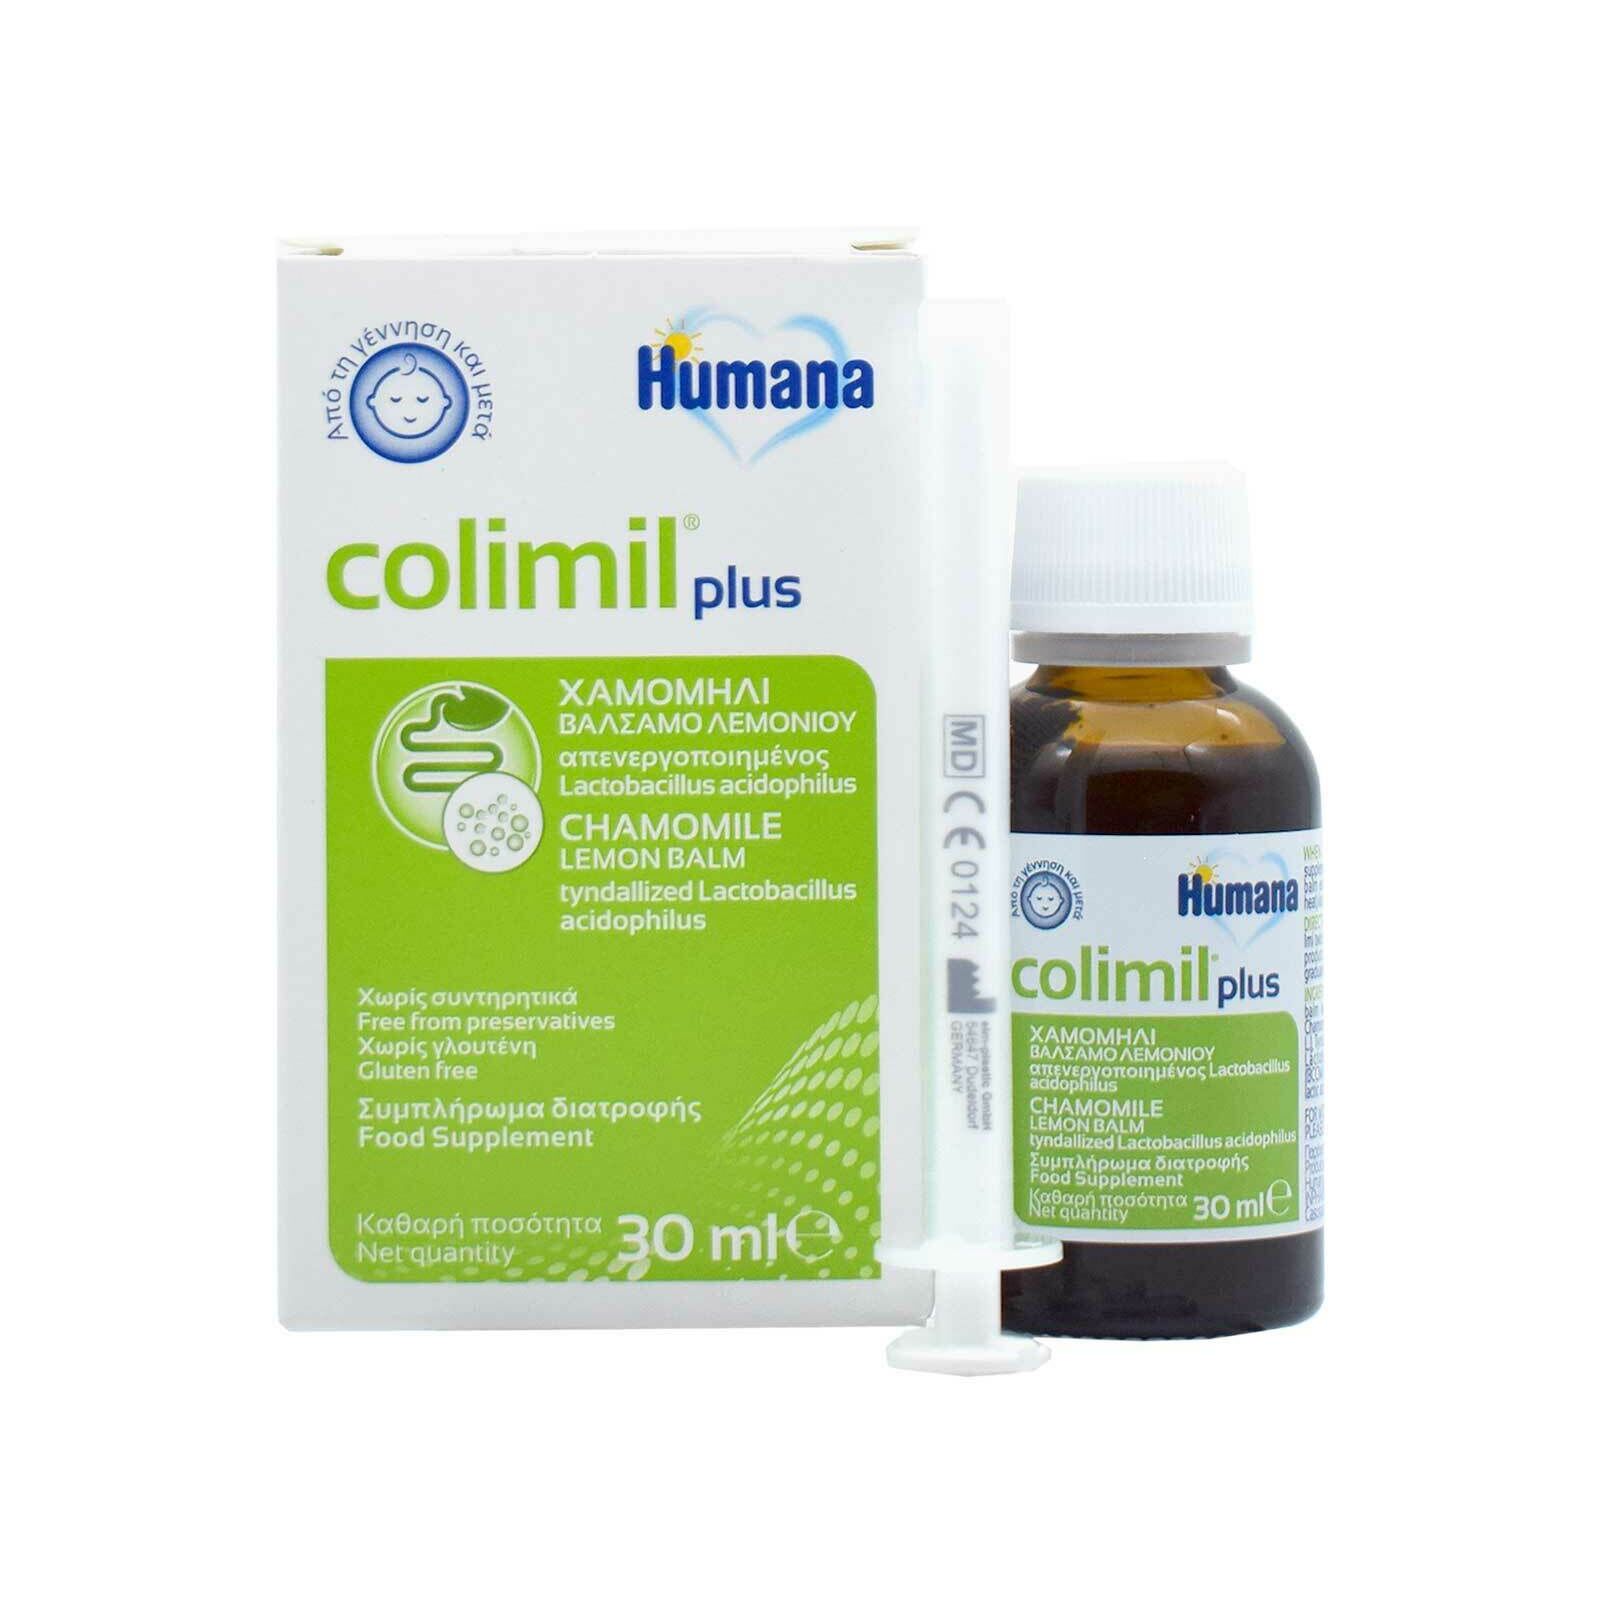 NEW_NEW 01 :: Humana Colimil Plus Baby Food Supplement Anti-Colic 30ml